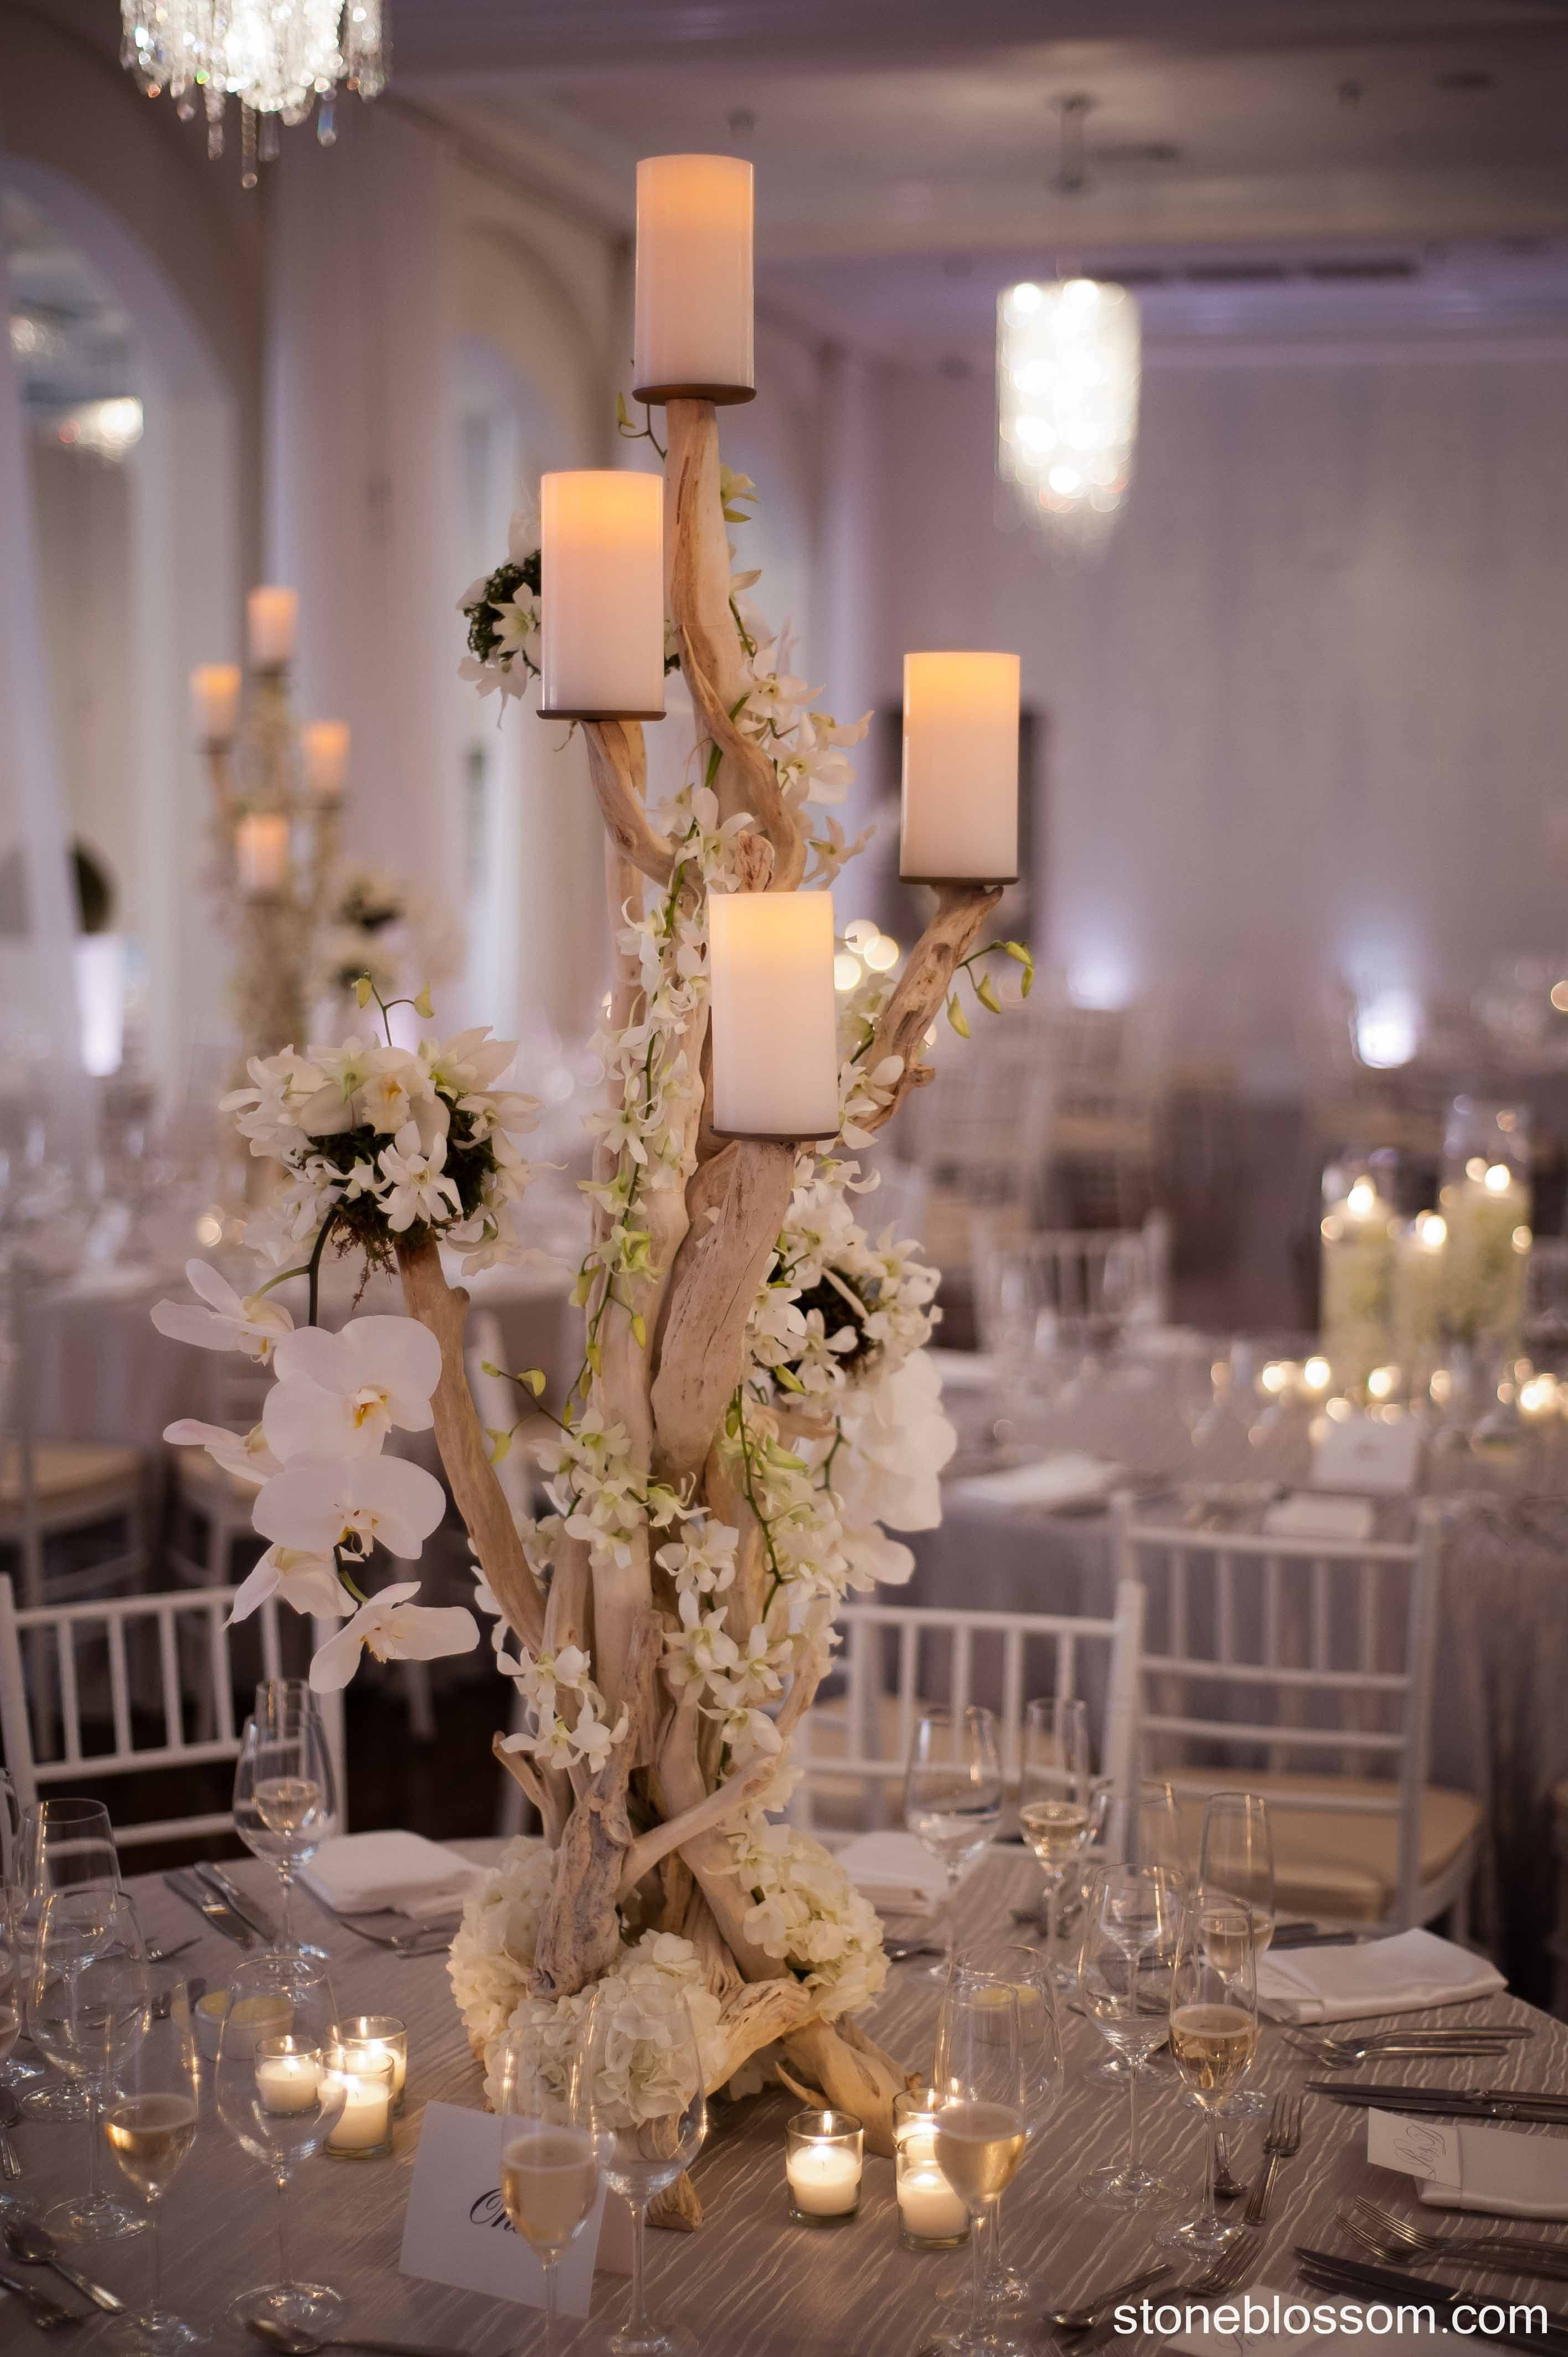 tall glass vases for centerpieces of decorative branches for weddings awesome tall vase centerpiece ideas for decorative branches for weddings luxury floral amp event design by stoneblossom of decorative branches for weddings